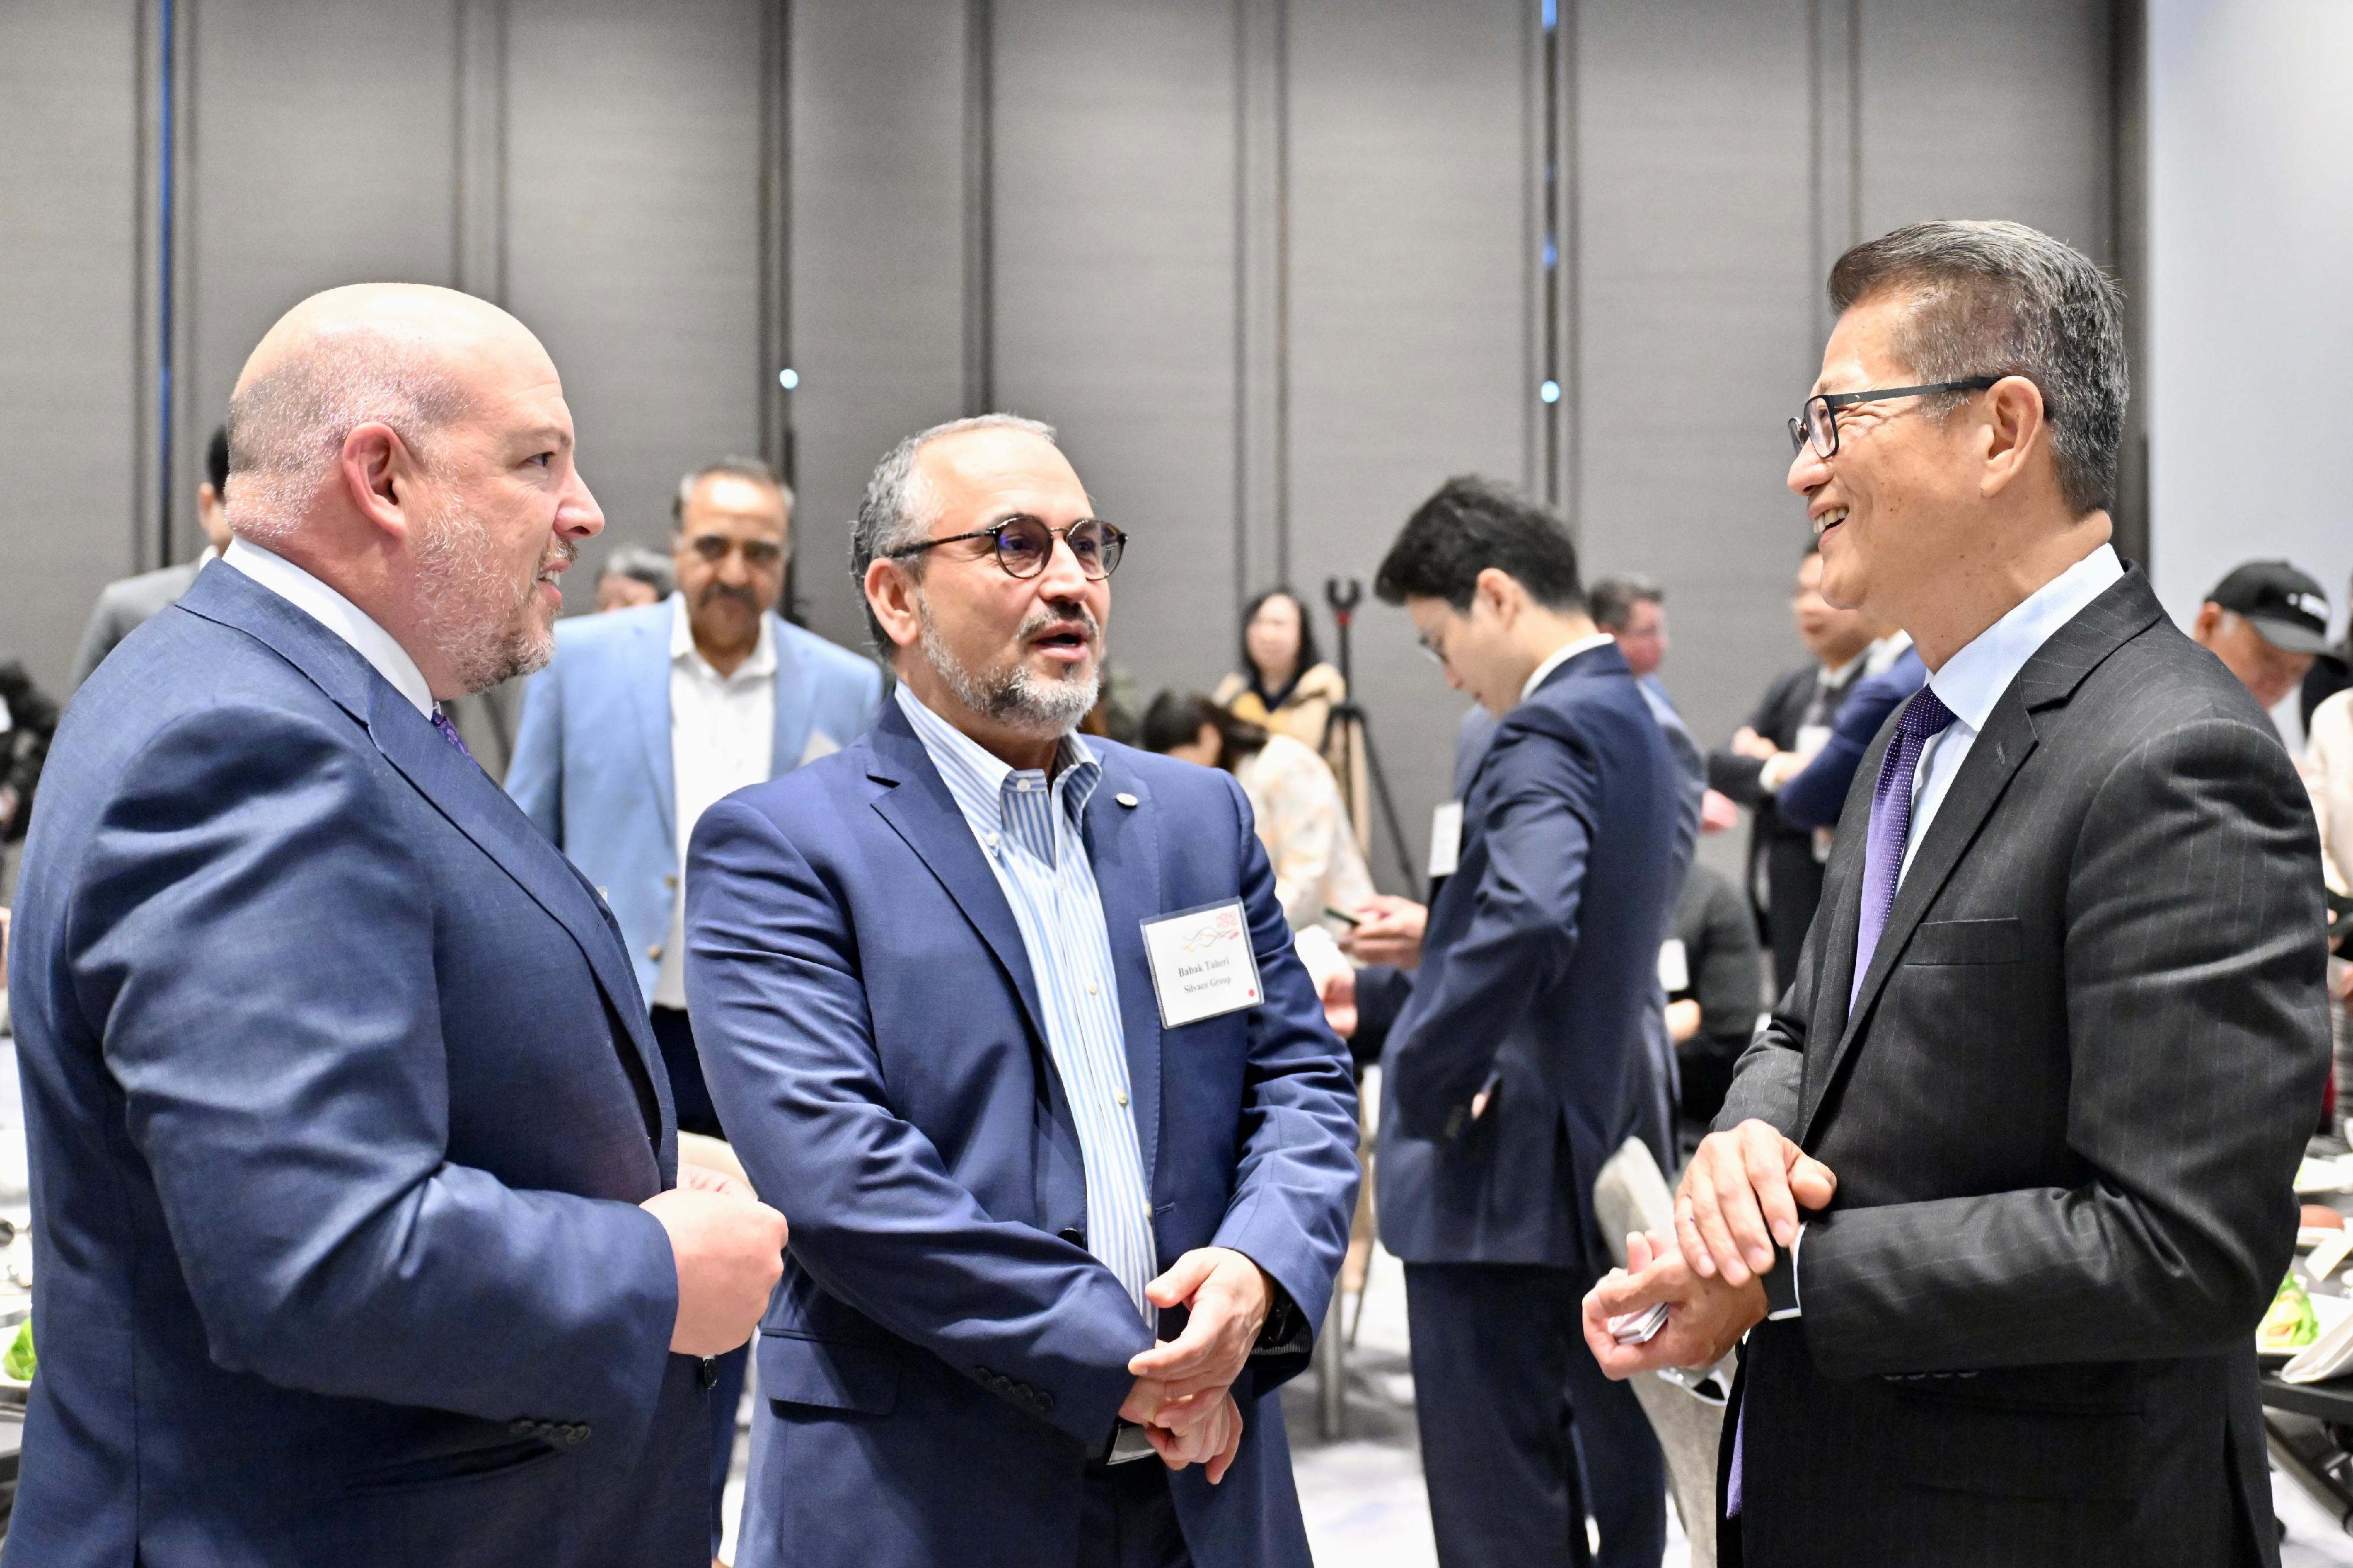 The Financial Secretary, Mr Paul Chan, began his visit to the United States yon May 28 (San Francisco time), and attended a business luncheon jointly organised by the Hong Kong Economic and Trade Office in San Francisco and the Bay Area Council, a business organisation in San Francisco. Photo shows Mr Chan (first right) interacting with local guests at the luncheon.